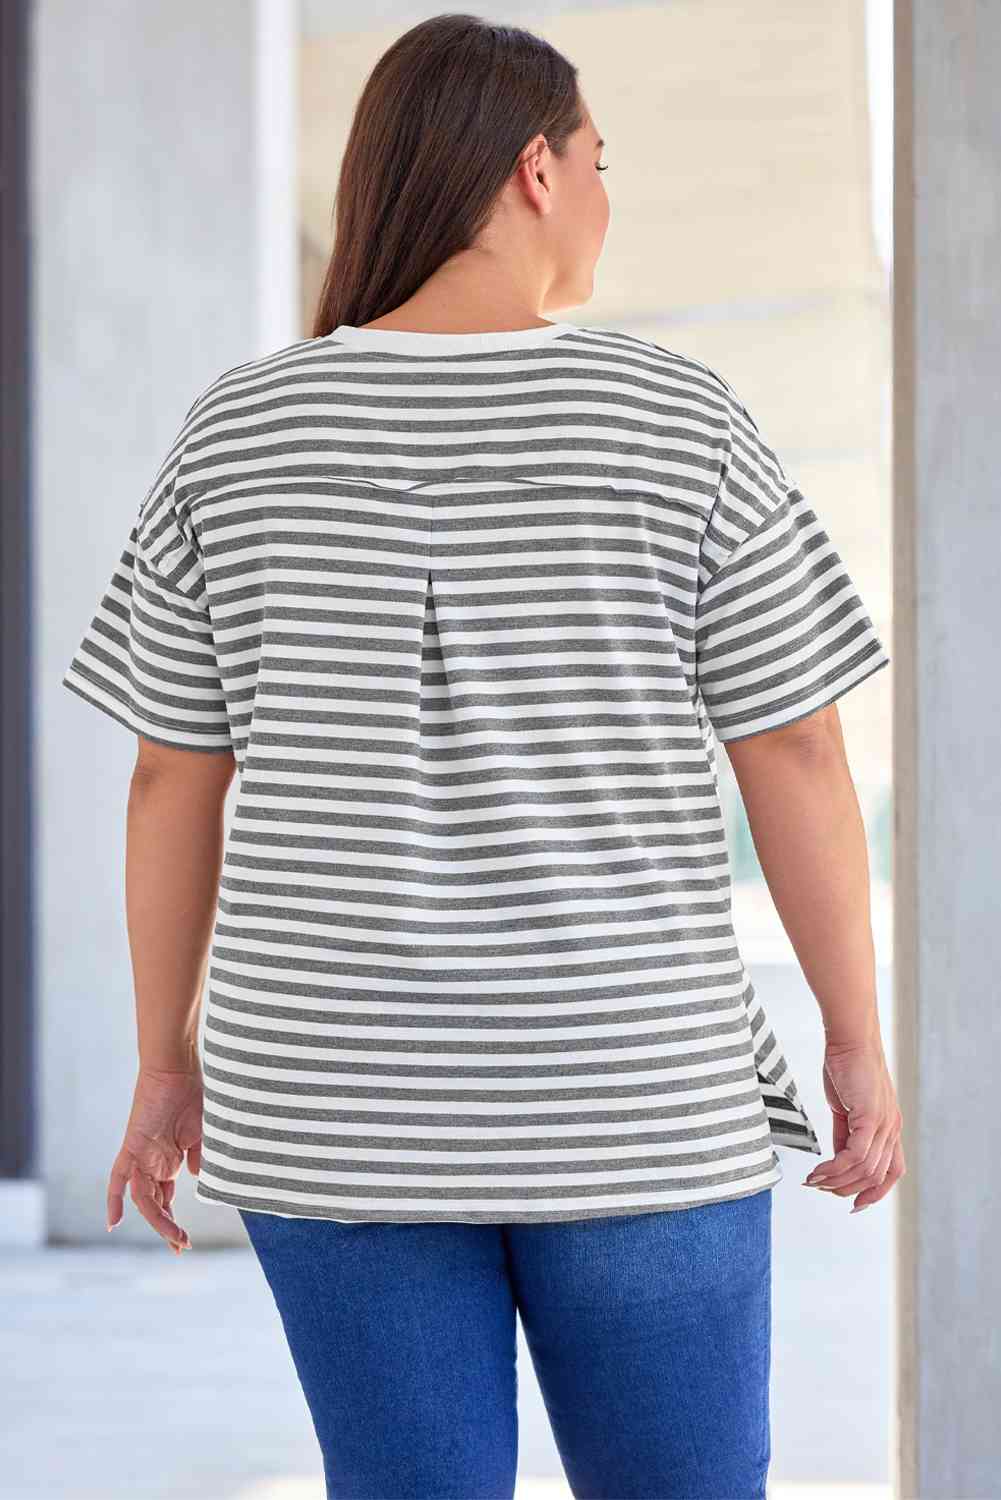 Plus Size Striped Notched Neck Short Sleeve Tee - Shop Tophatter Deals, Electronics, Fashion, Jewelry, Health, Beauty, Home Decor, Free Shipping